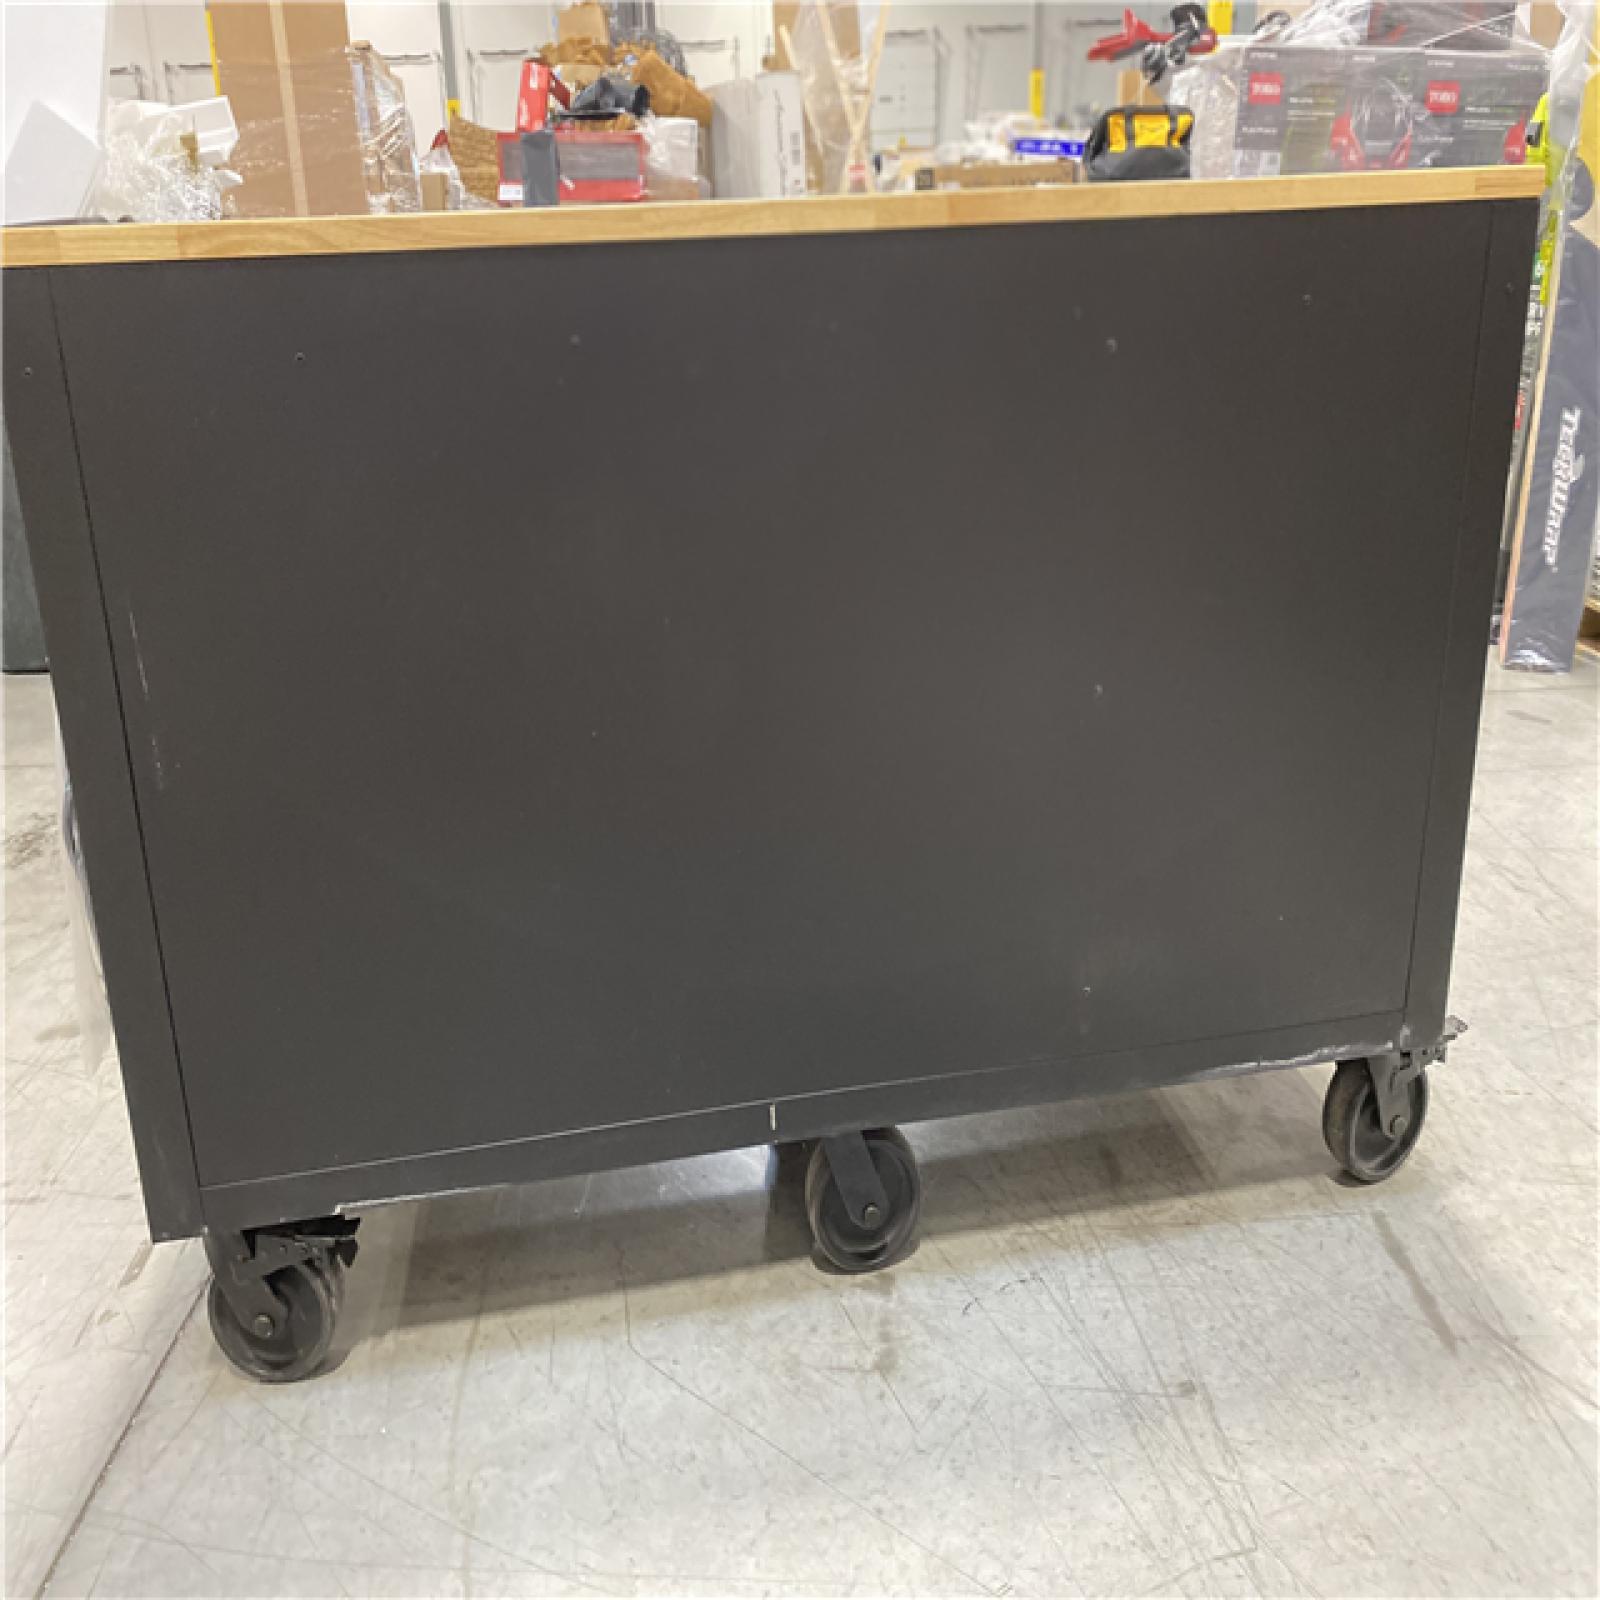 DALLAS LOCATION - Husky Tool Storage 62 in. W Heavy Duty Matte Black Mobile Workbench Cabinet with Adjustable Height Wood